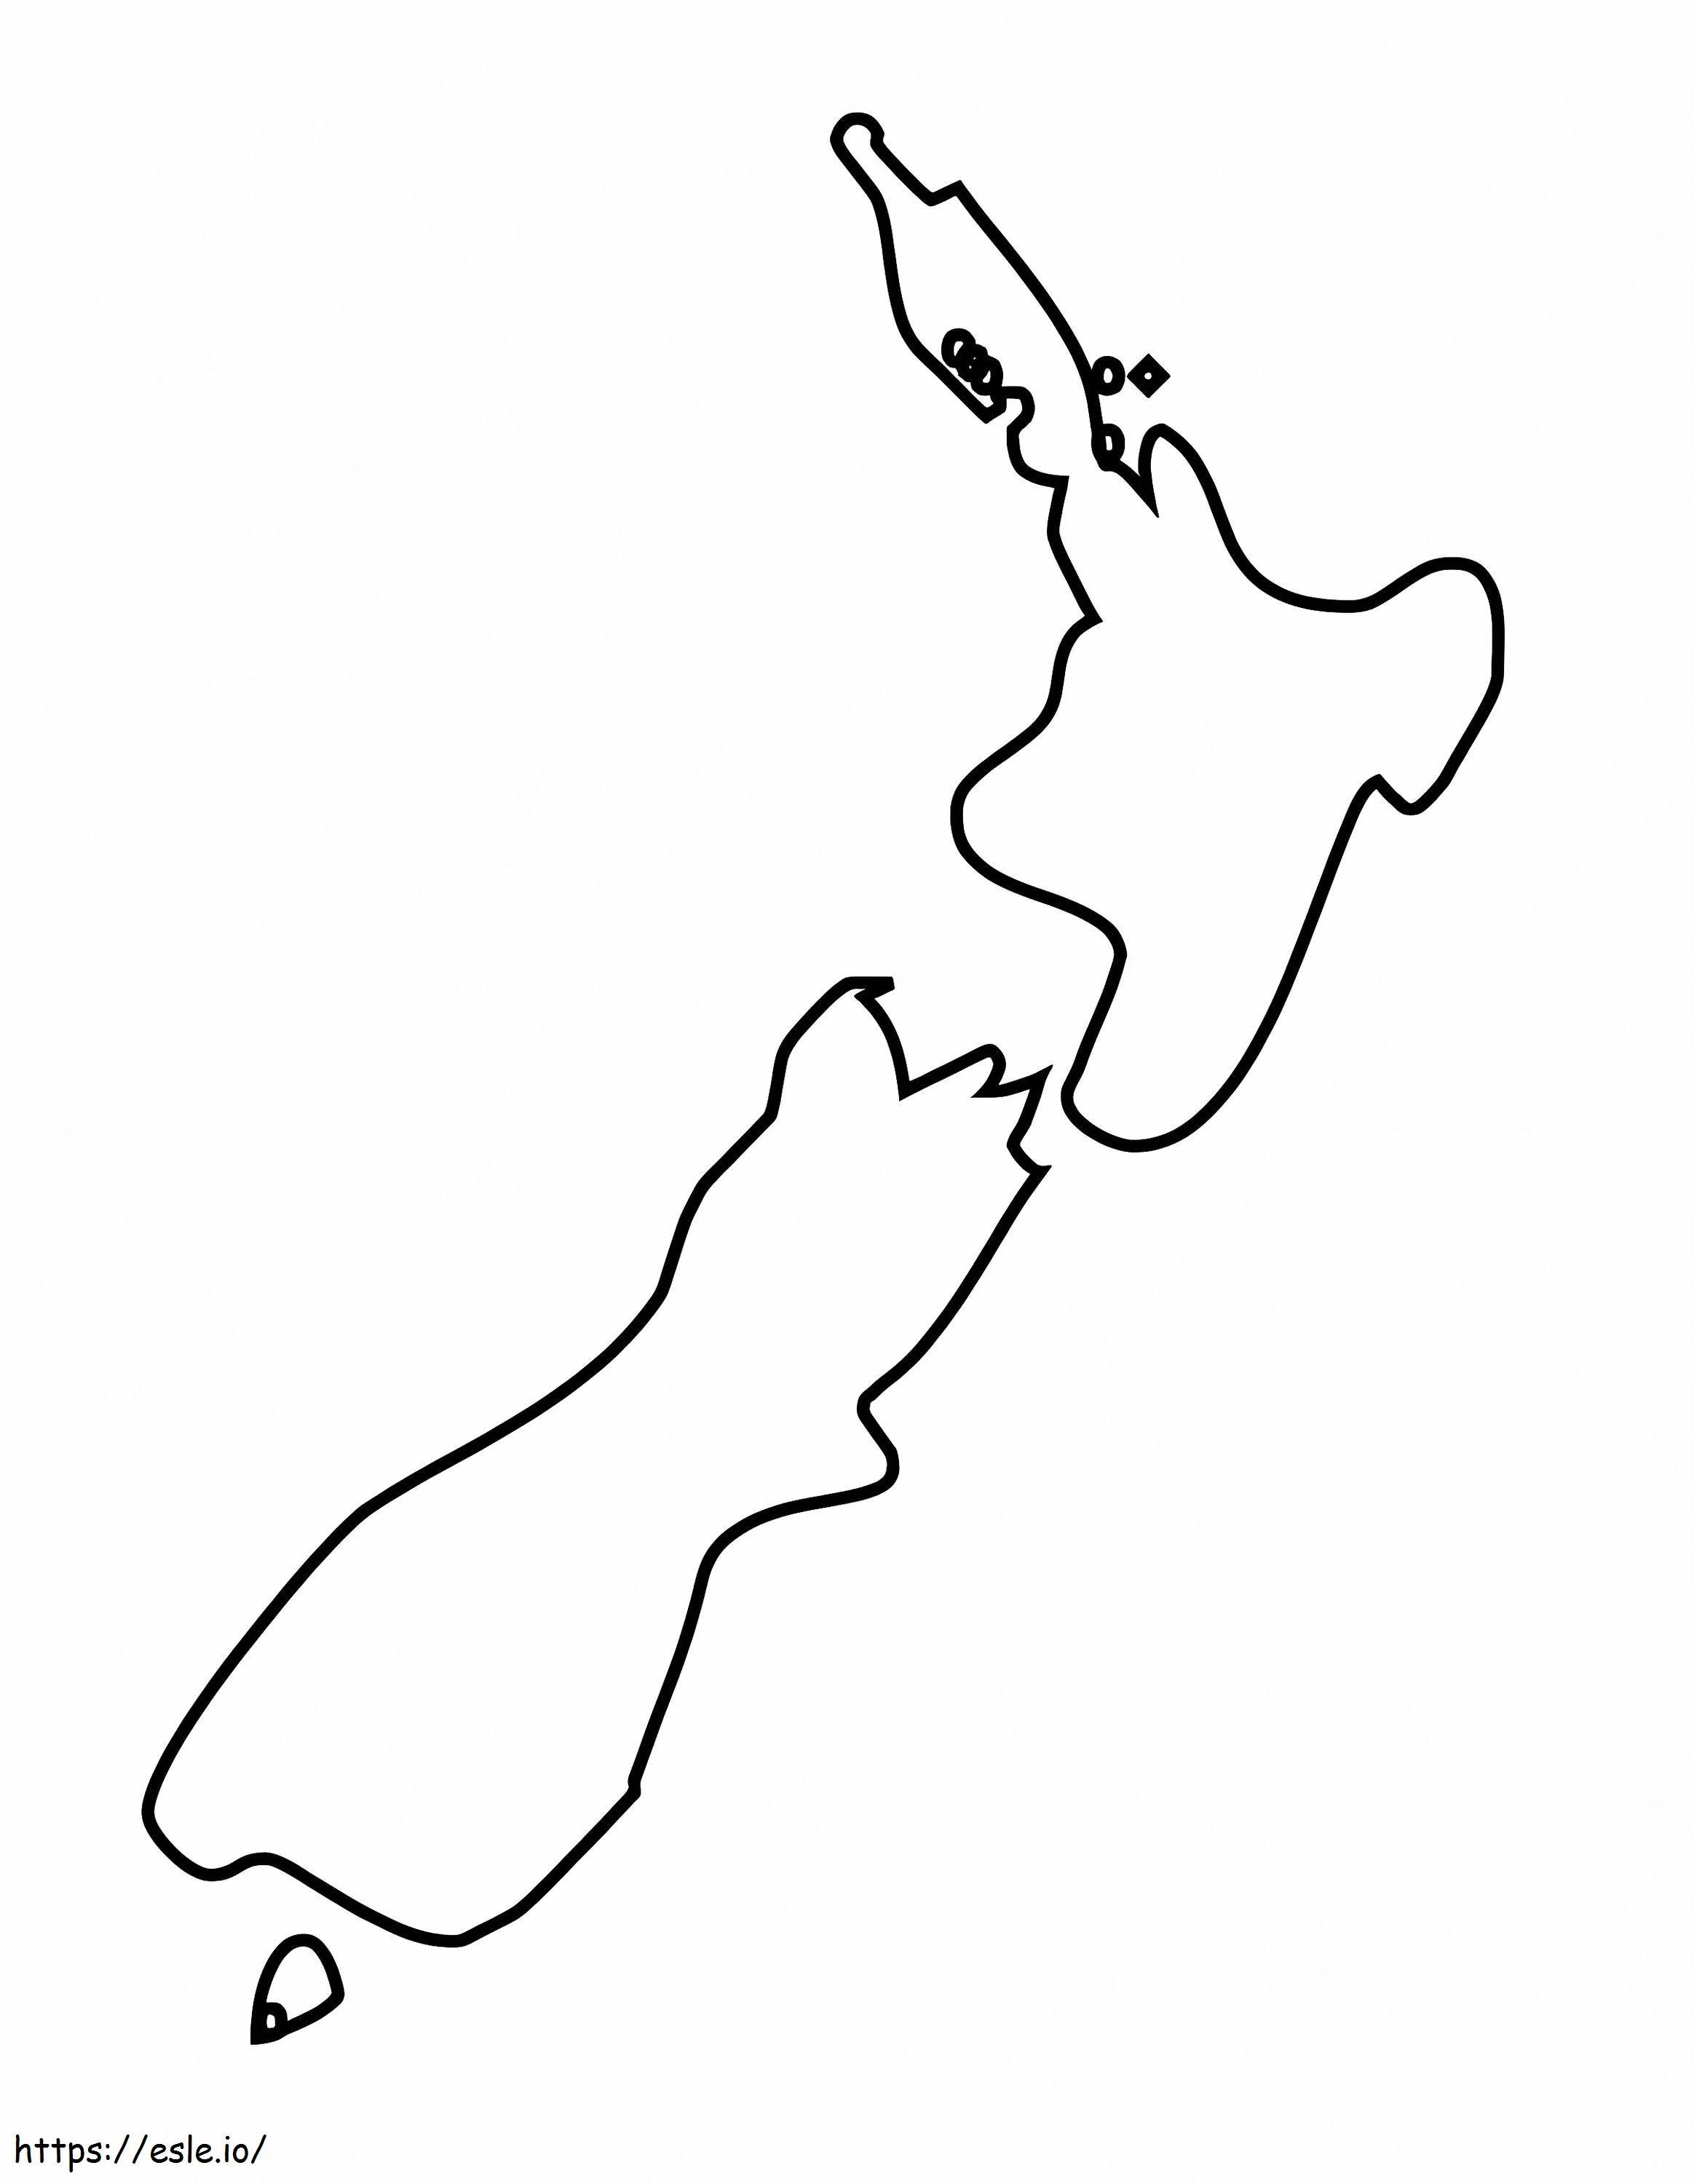 New Zealand Map 2 coloring page